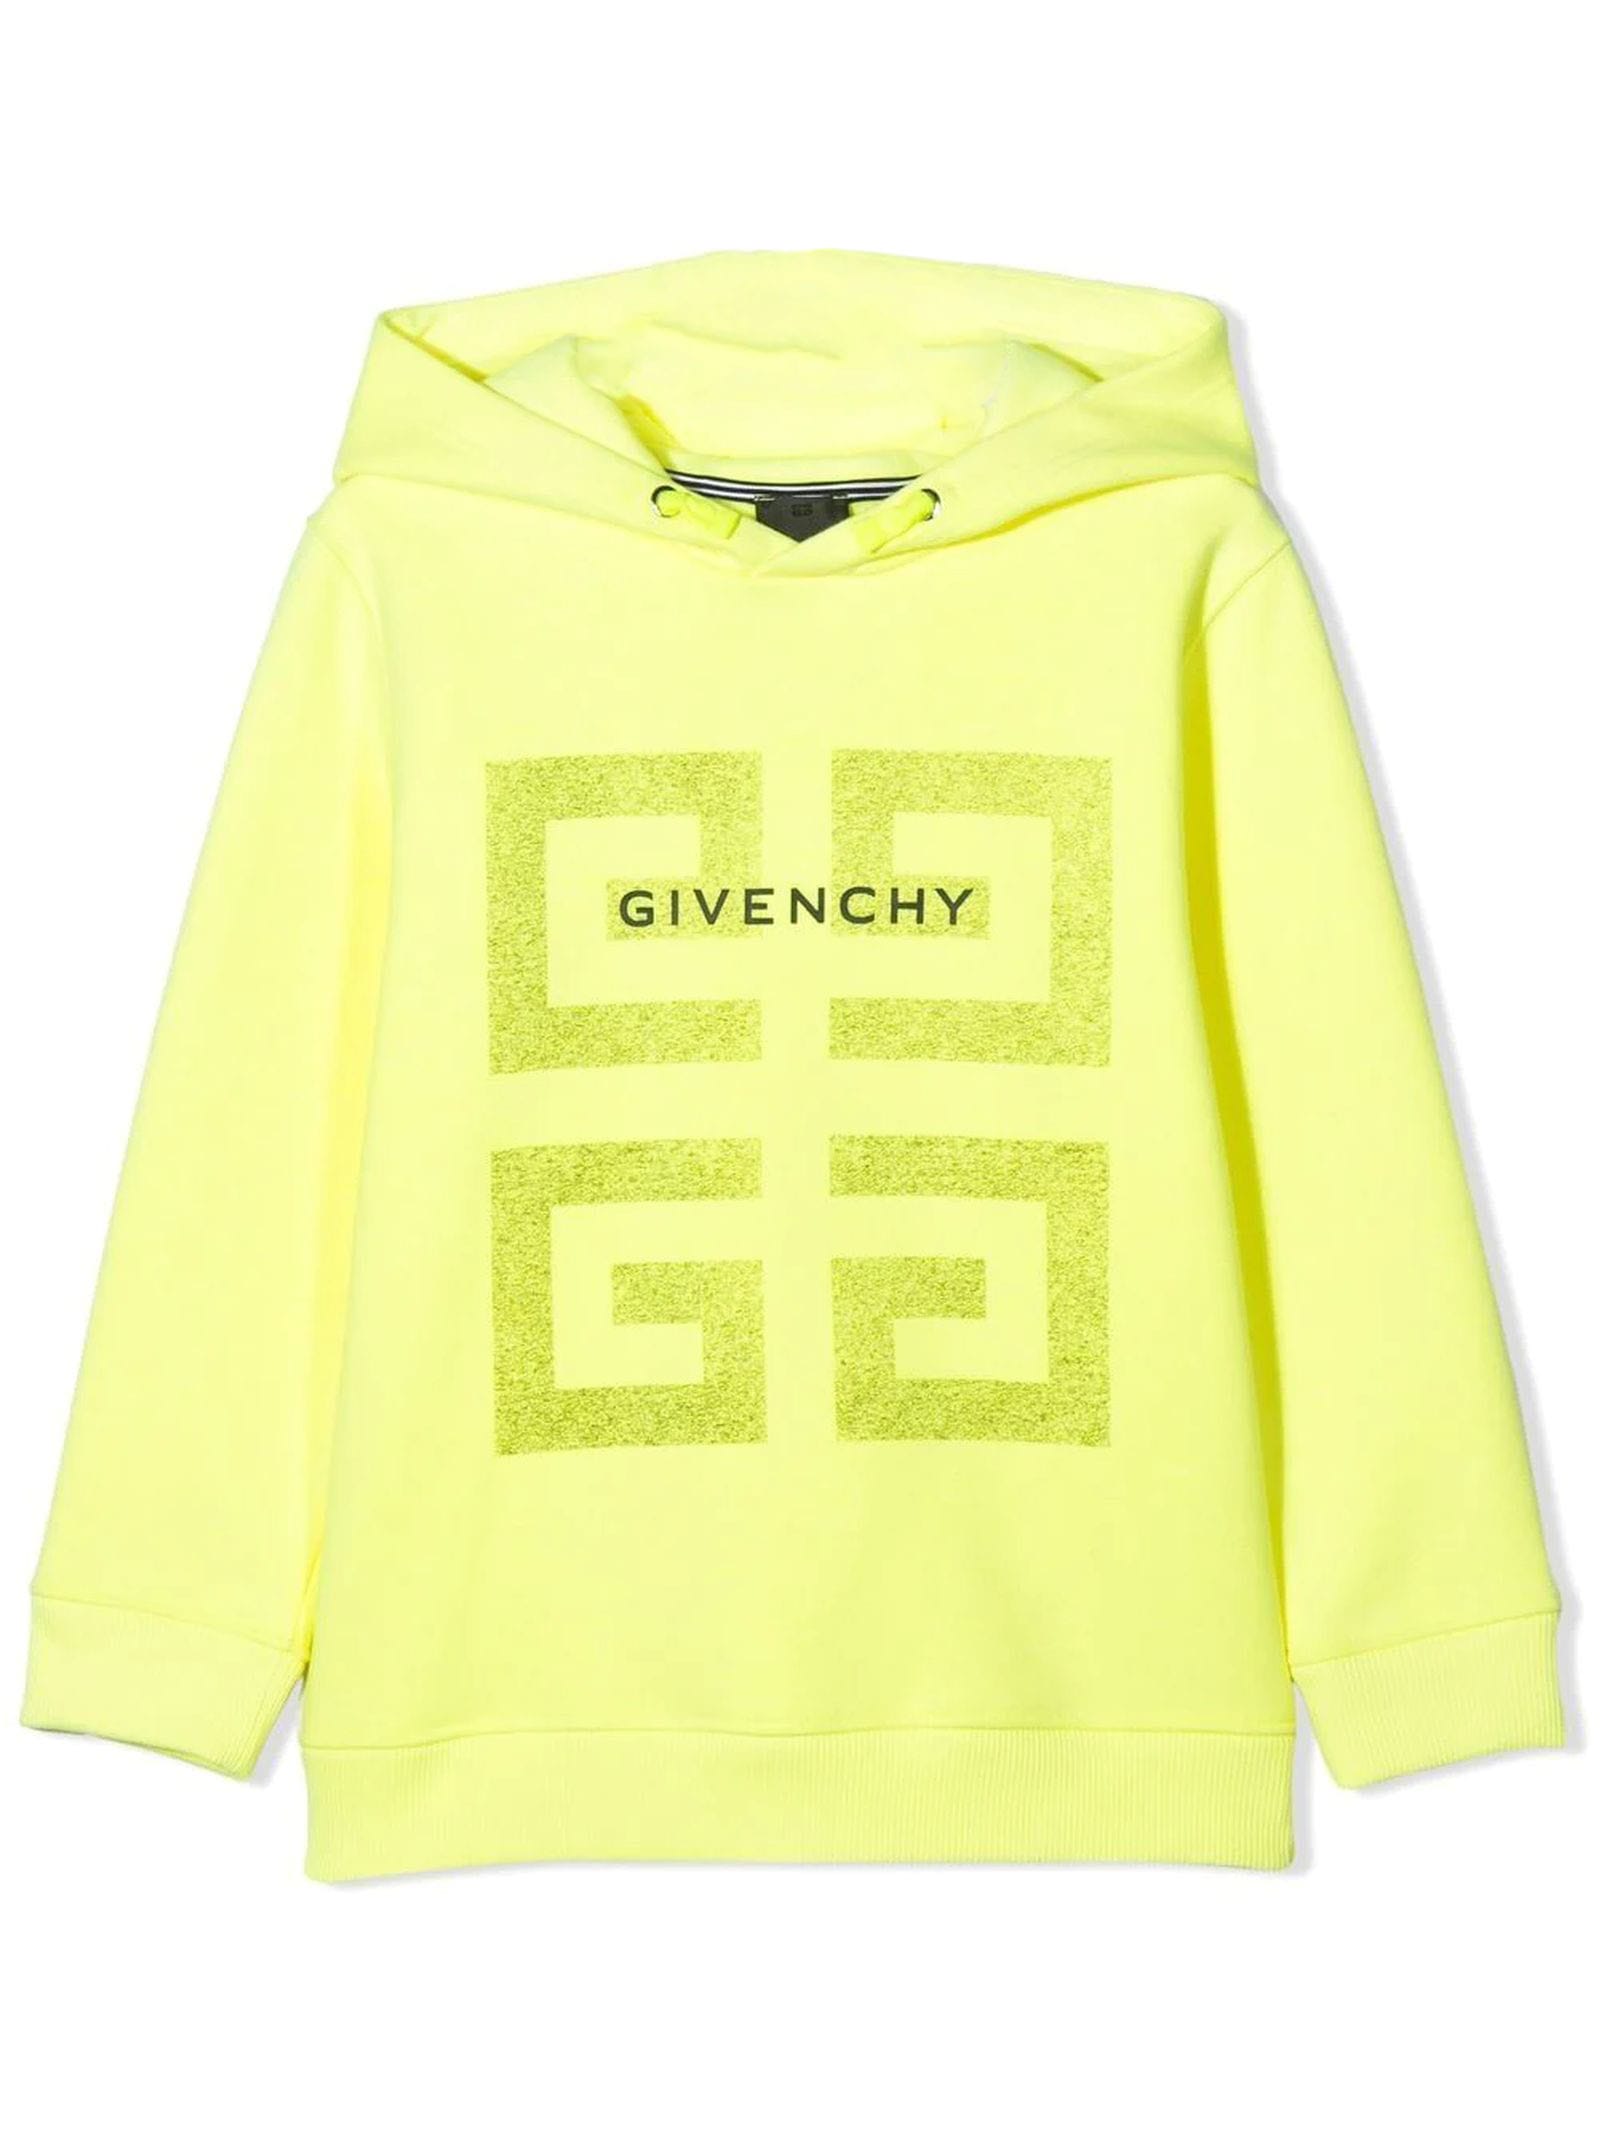 GIVENCHY YELLOW COTTON HOODIE